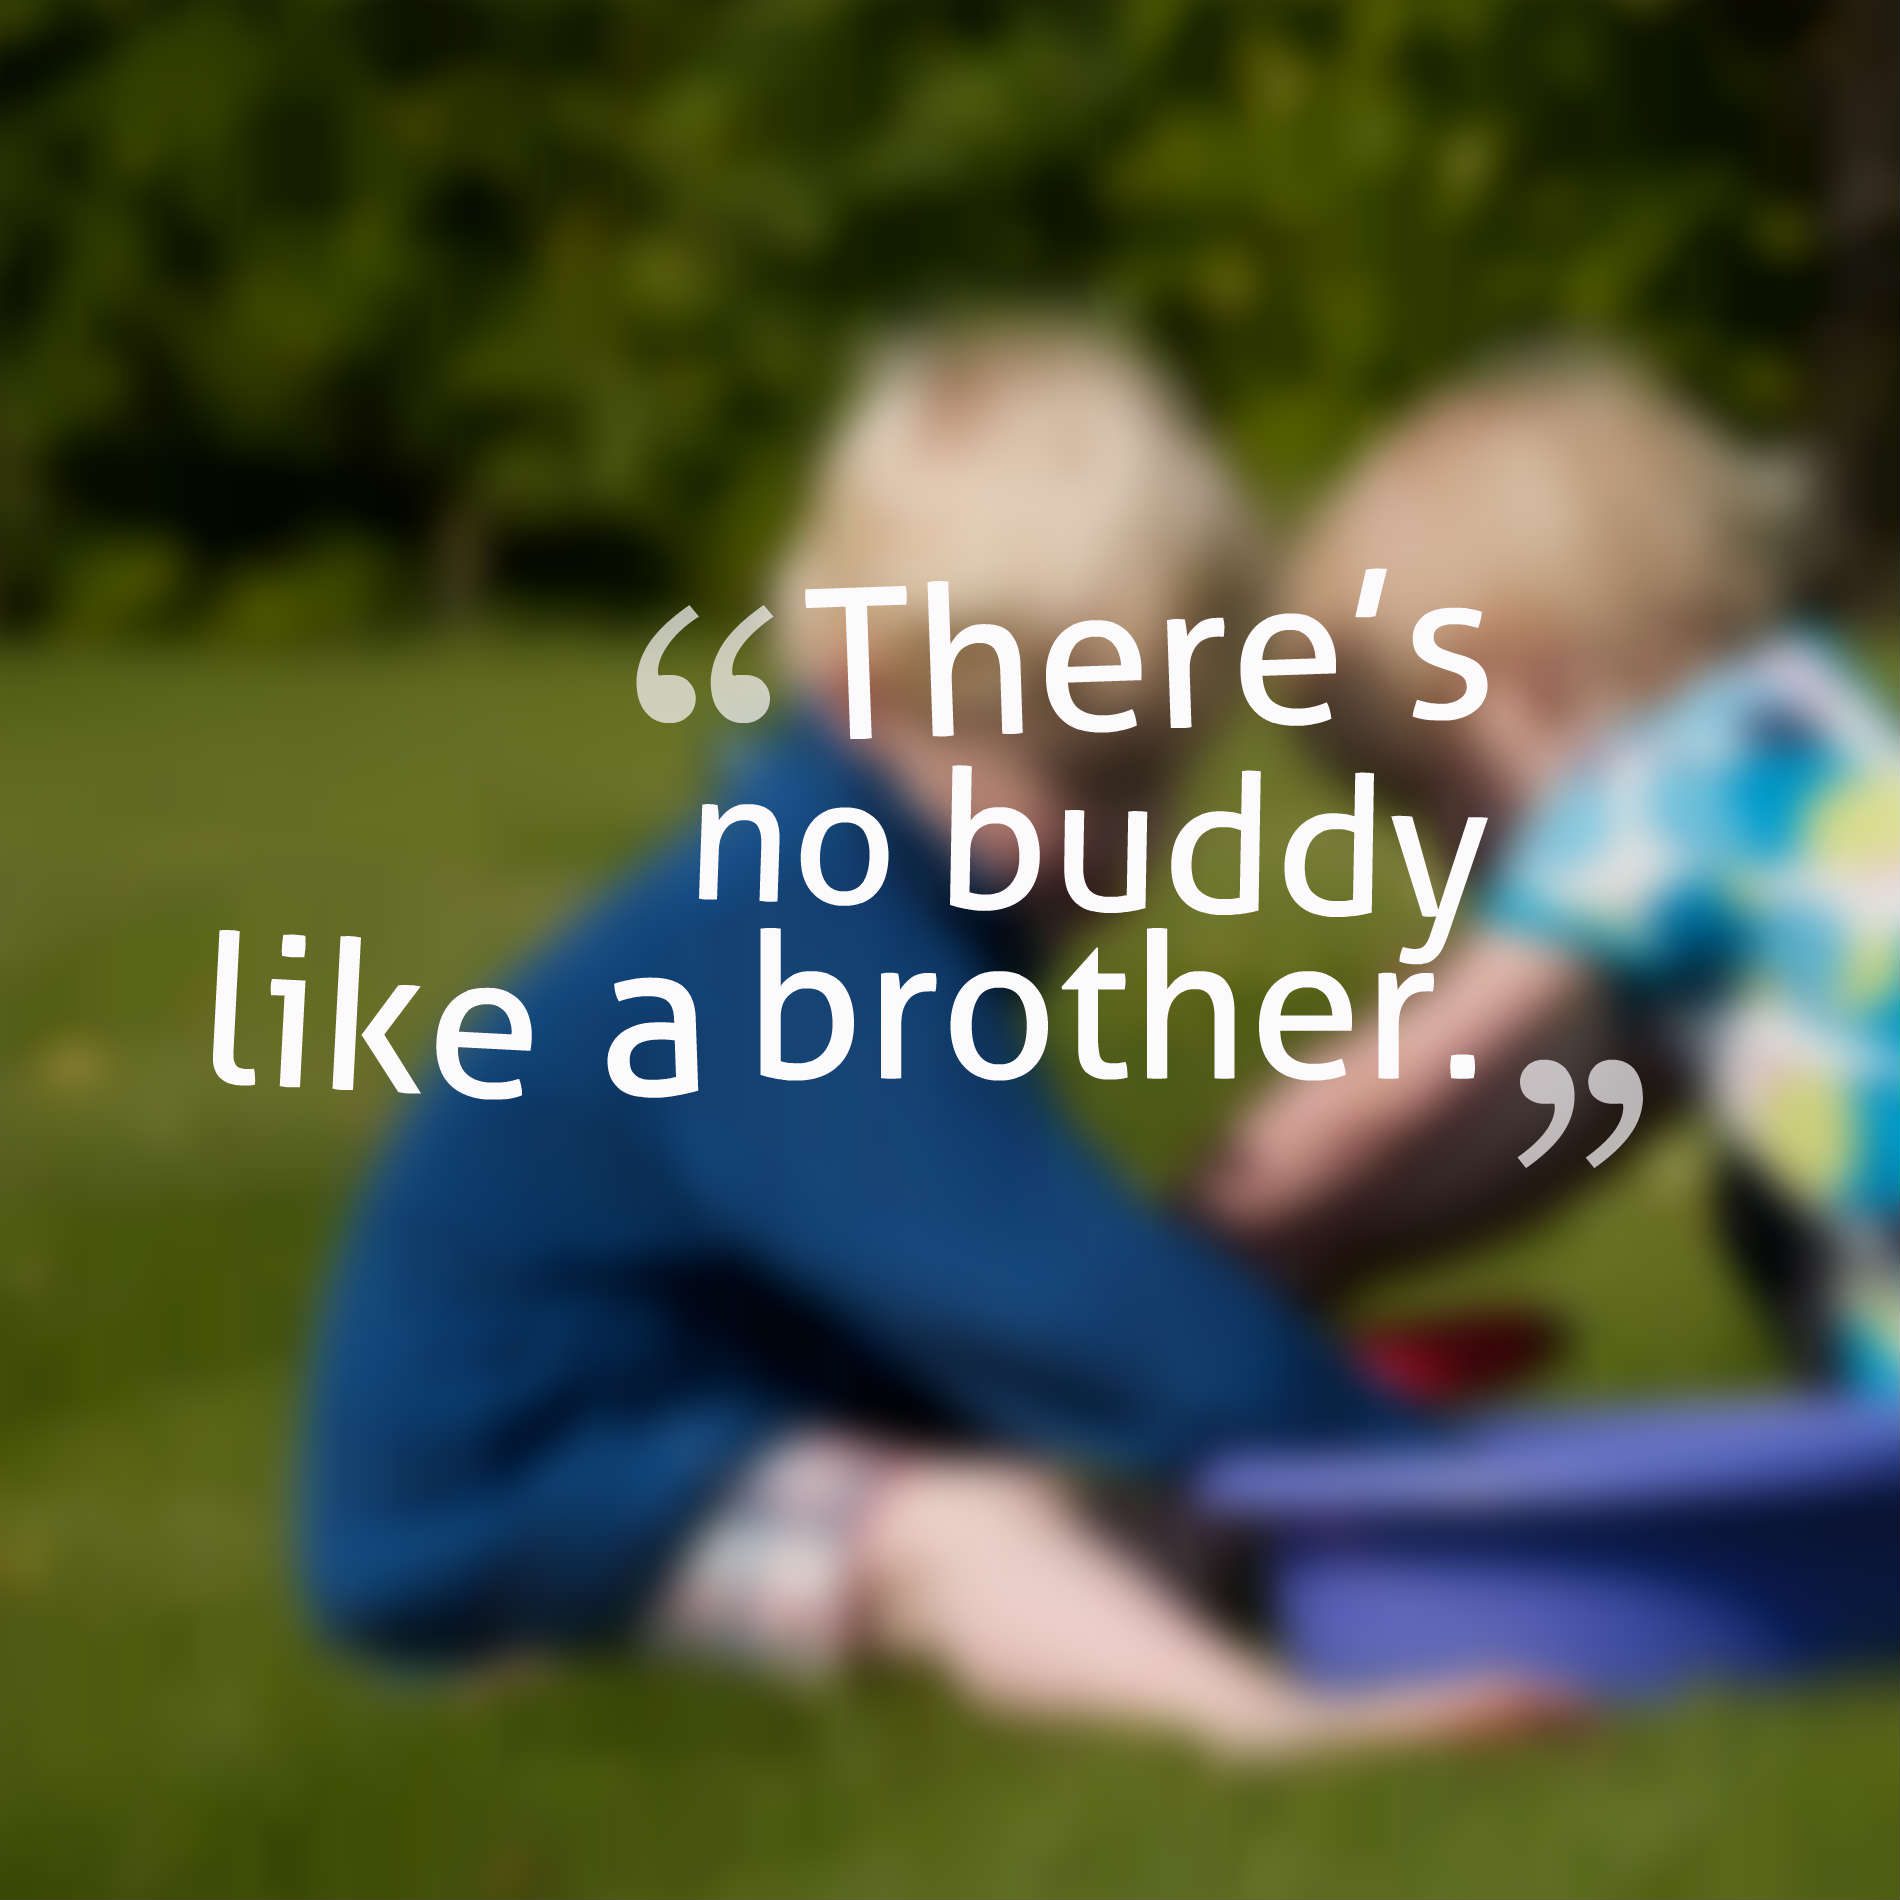 There’s no buddy like a brother.